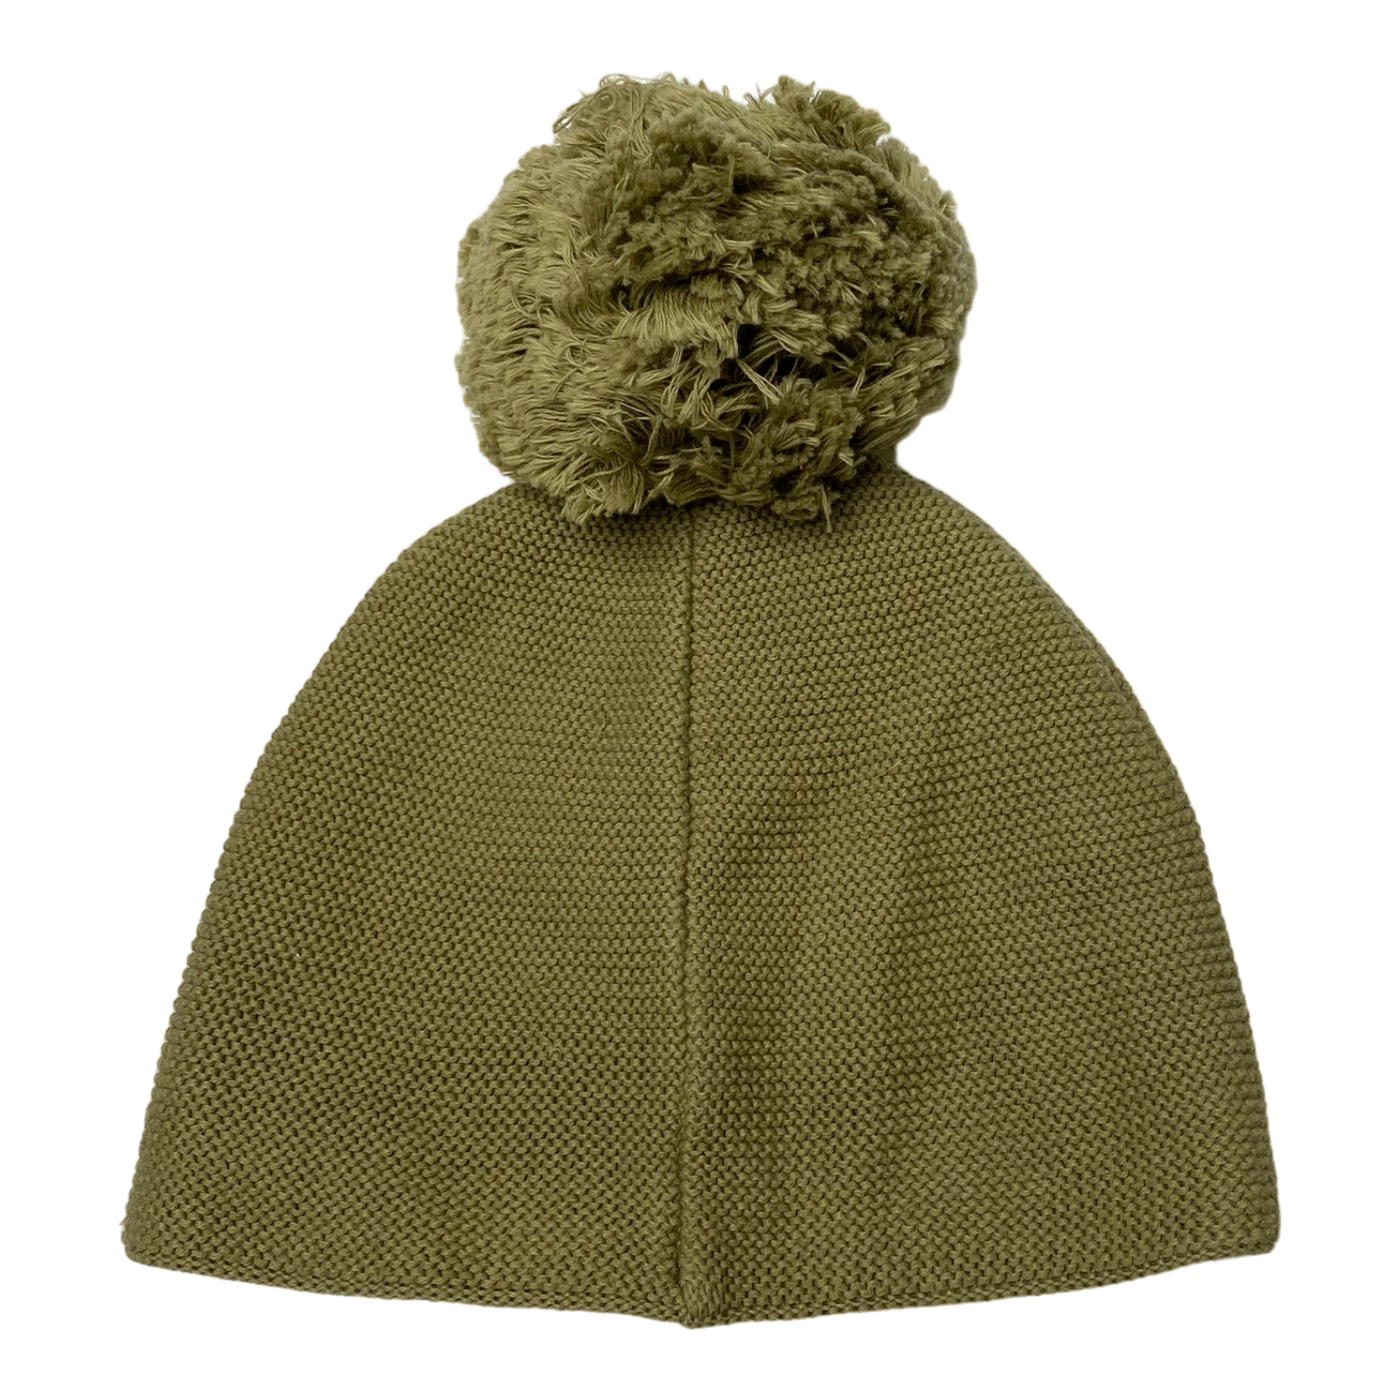 Metsola knitted cotton beanie, hunter green | 5-6y